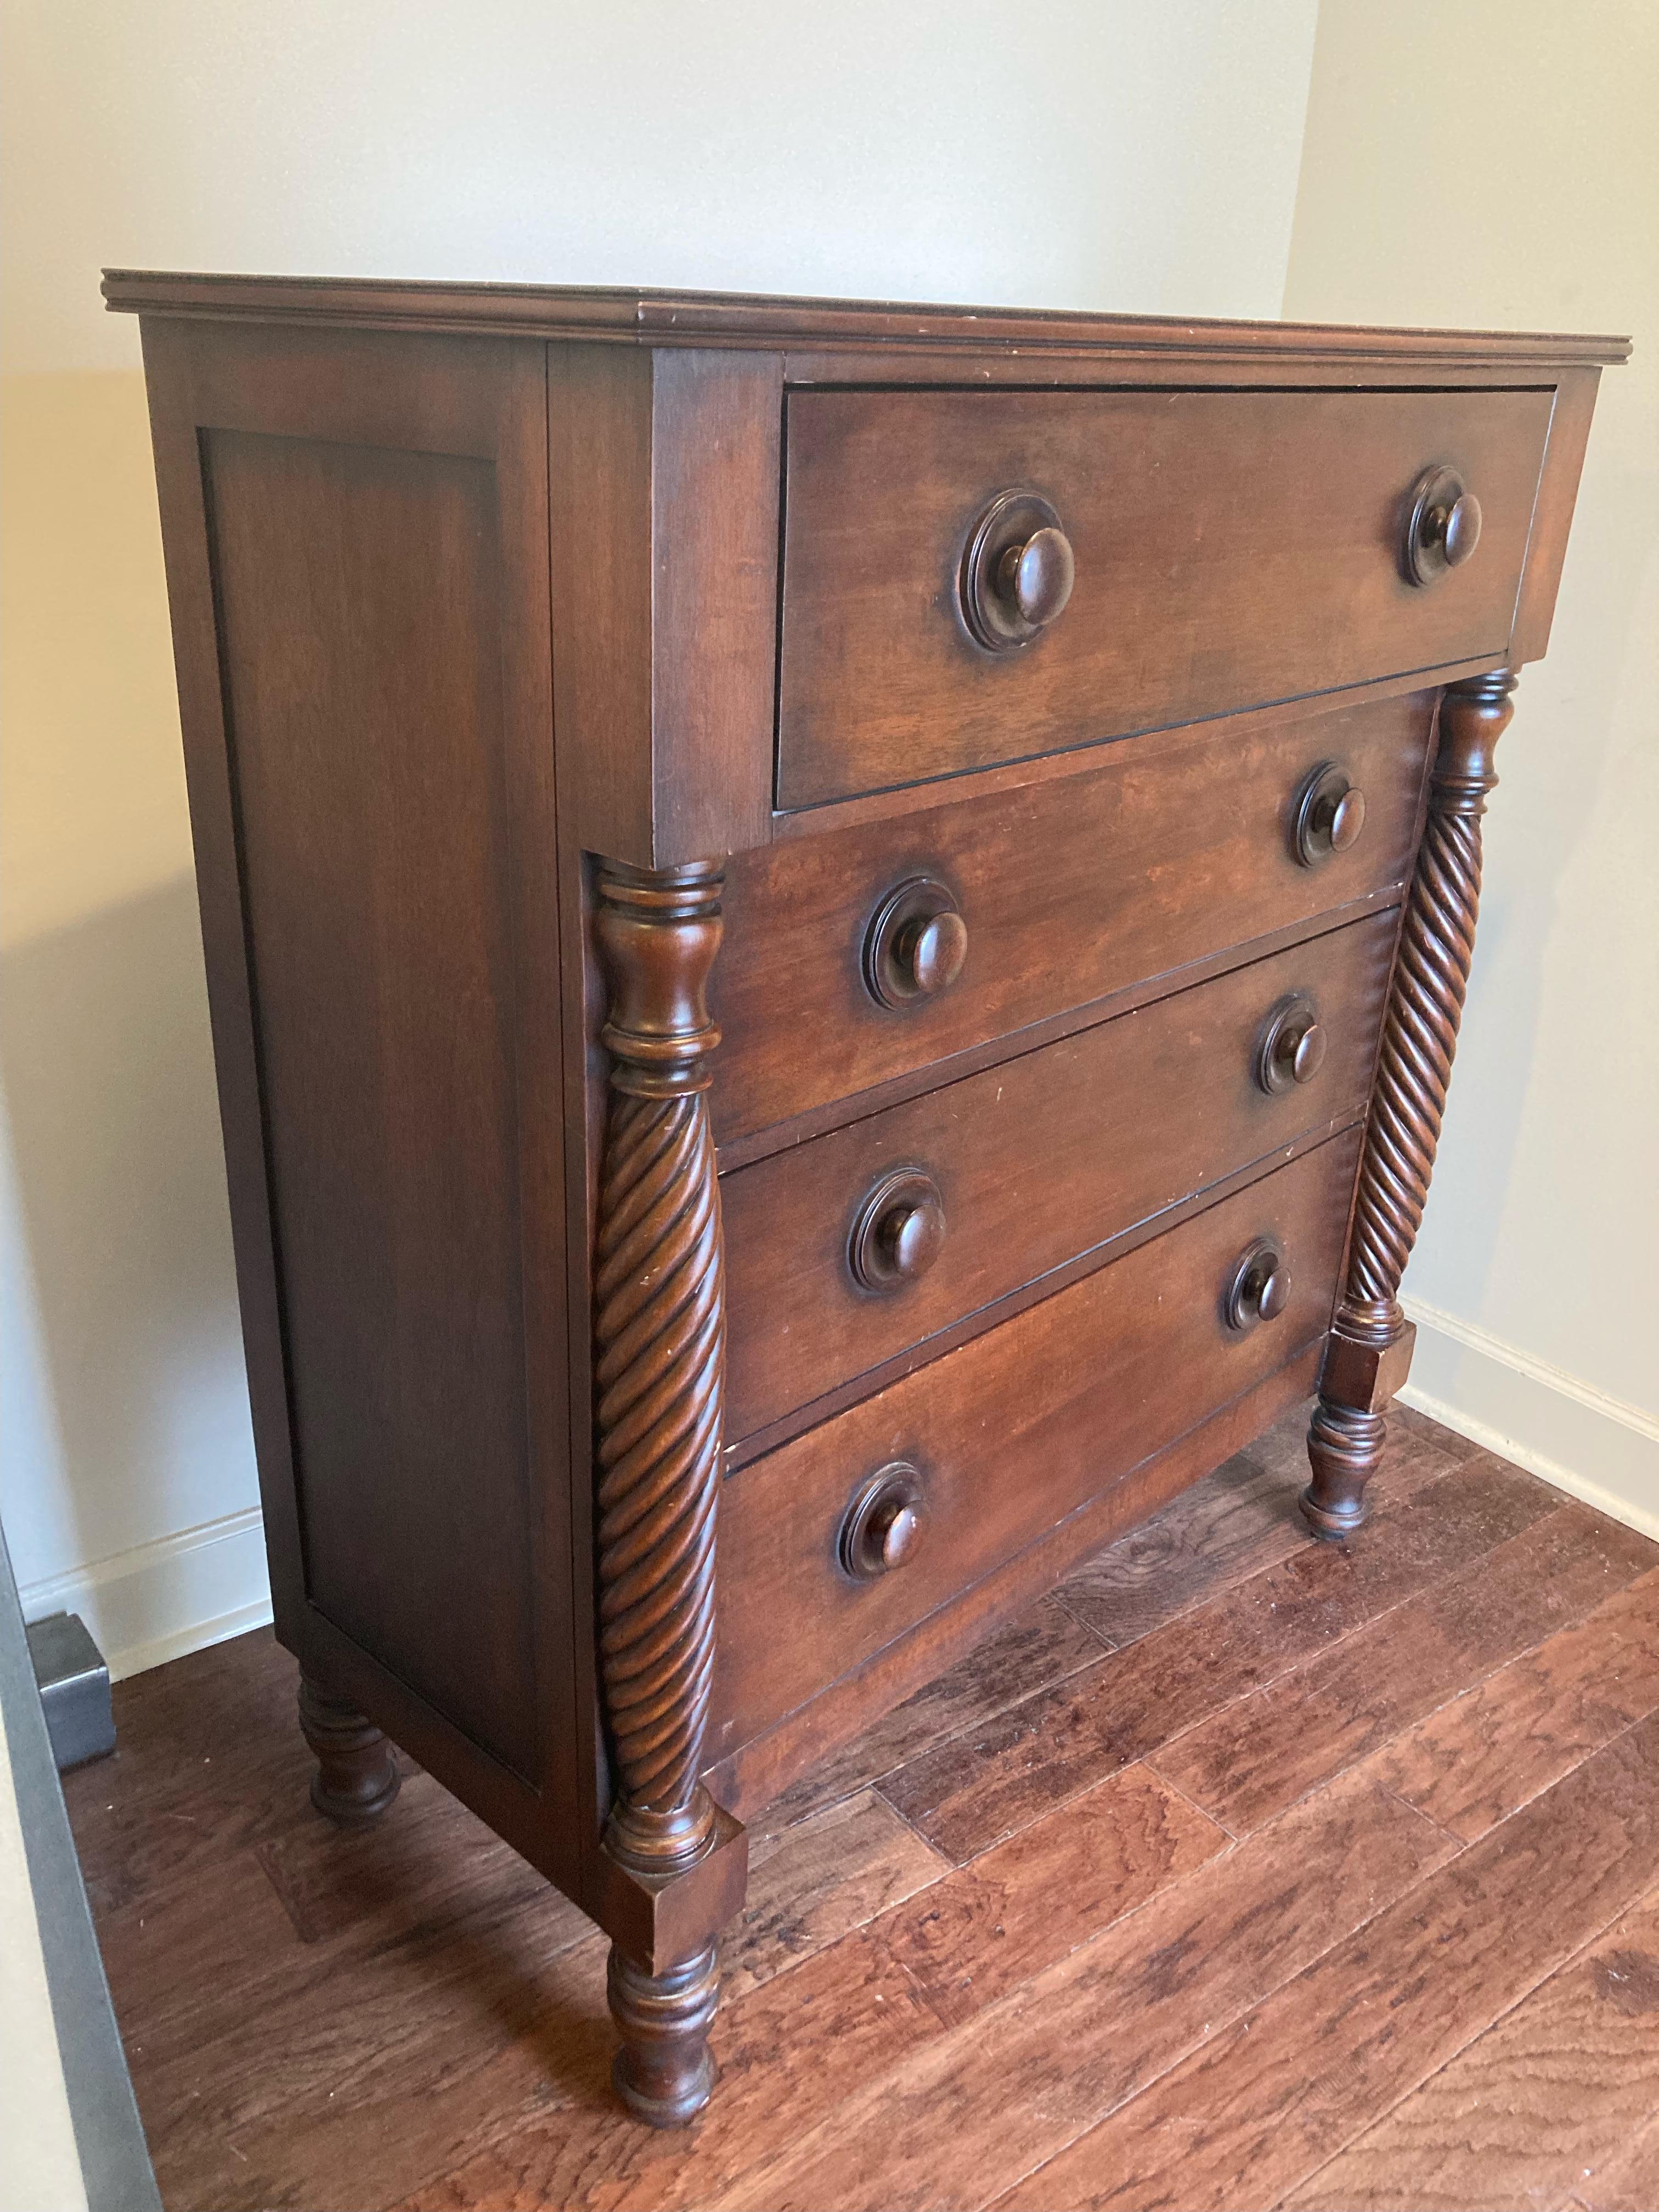 A gorgeous mahogany American Empire style four drawer highboy dresser chest
with carved columns and turned legs.